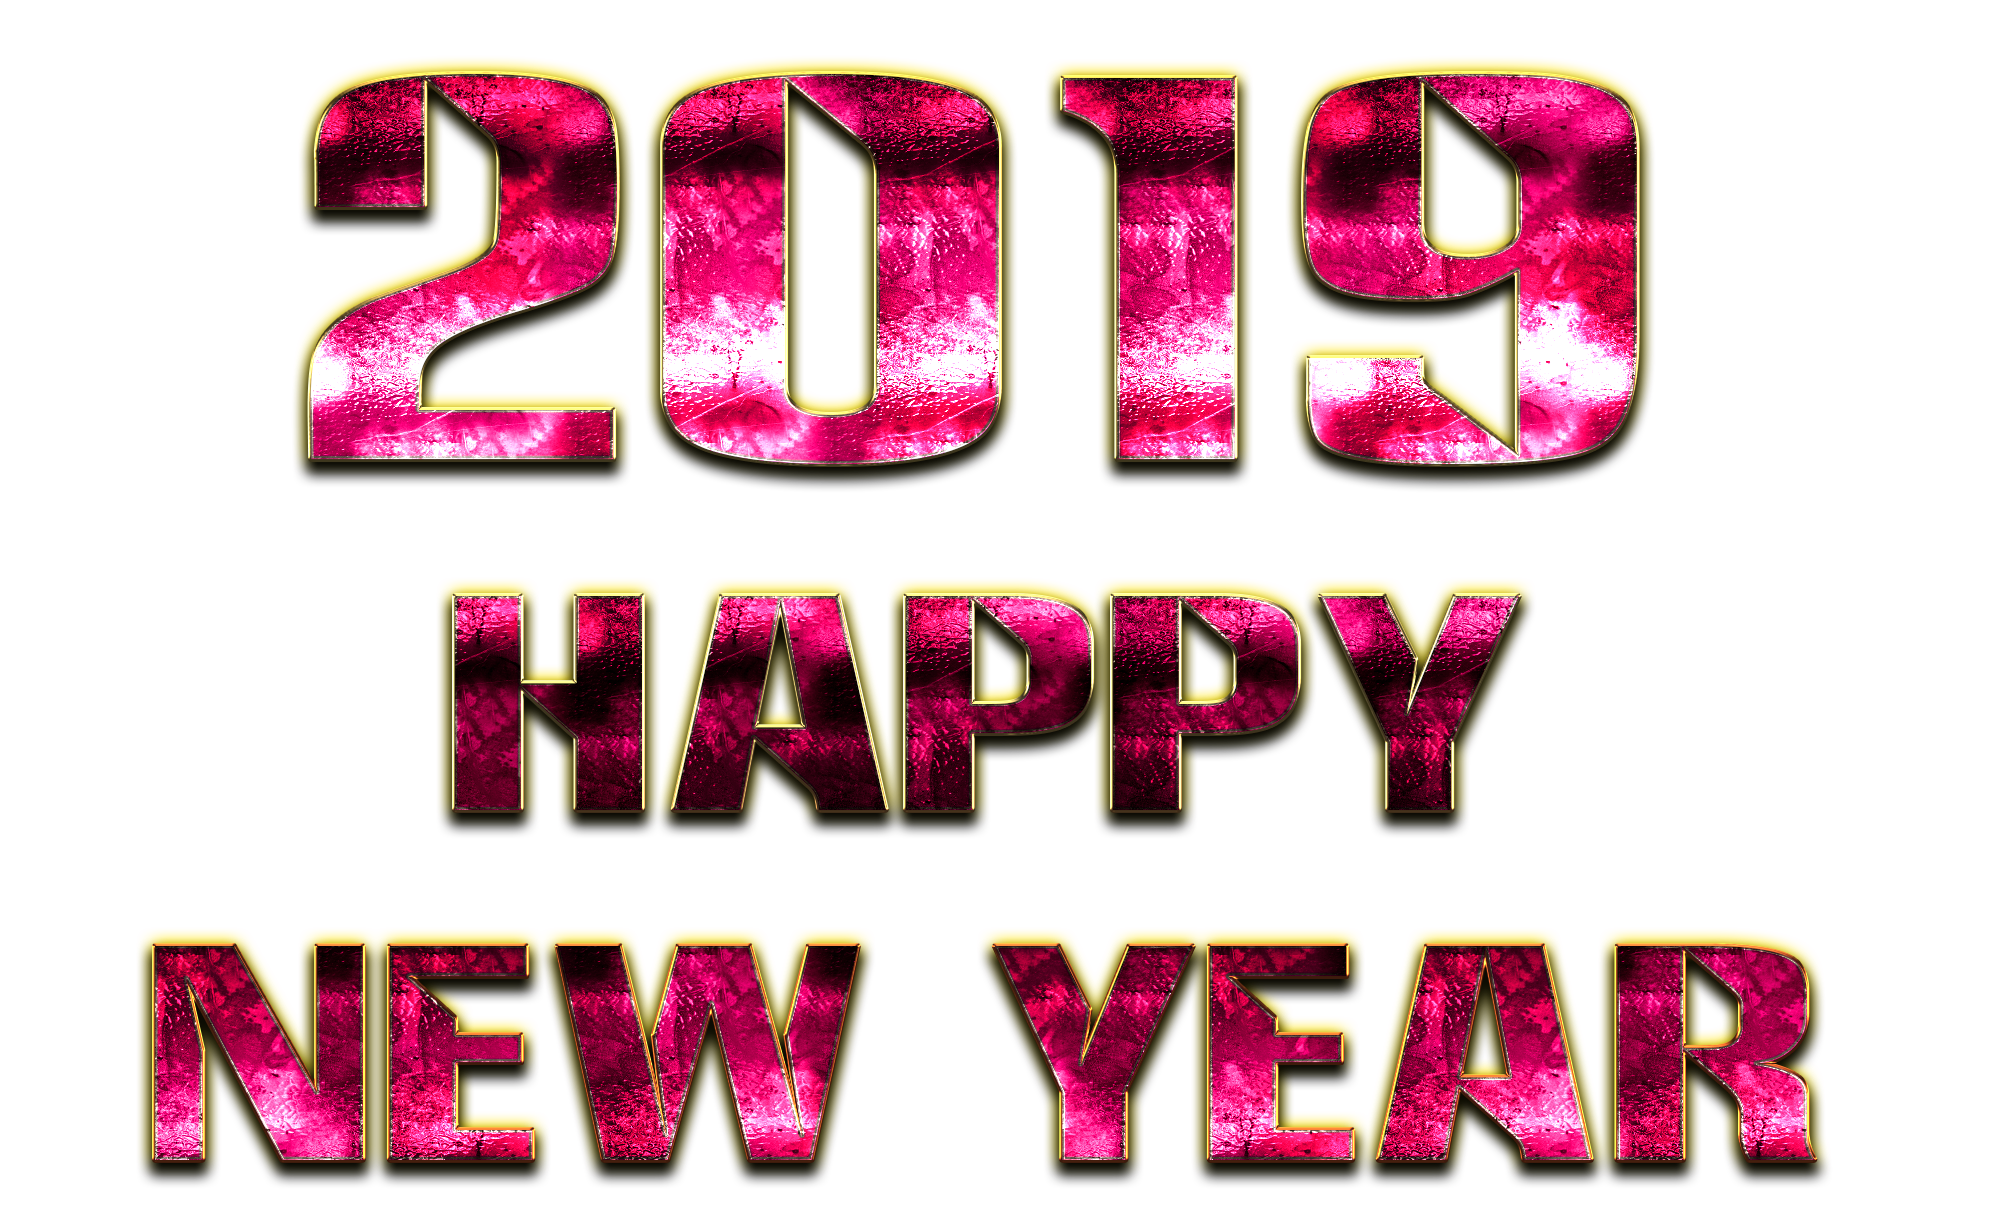 2019 Happy New Year PNG